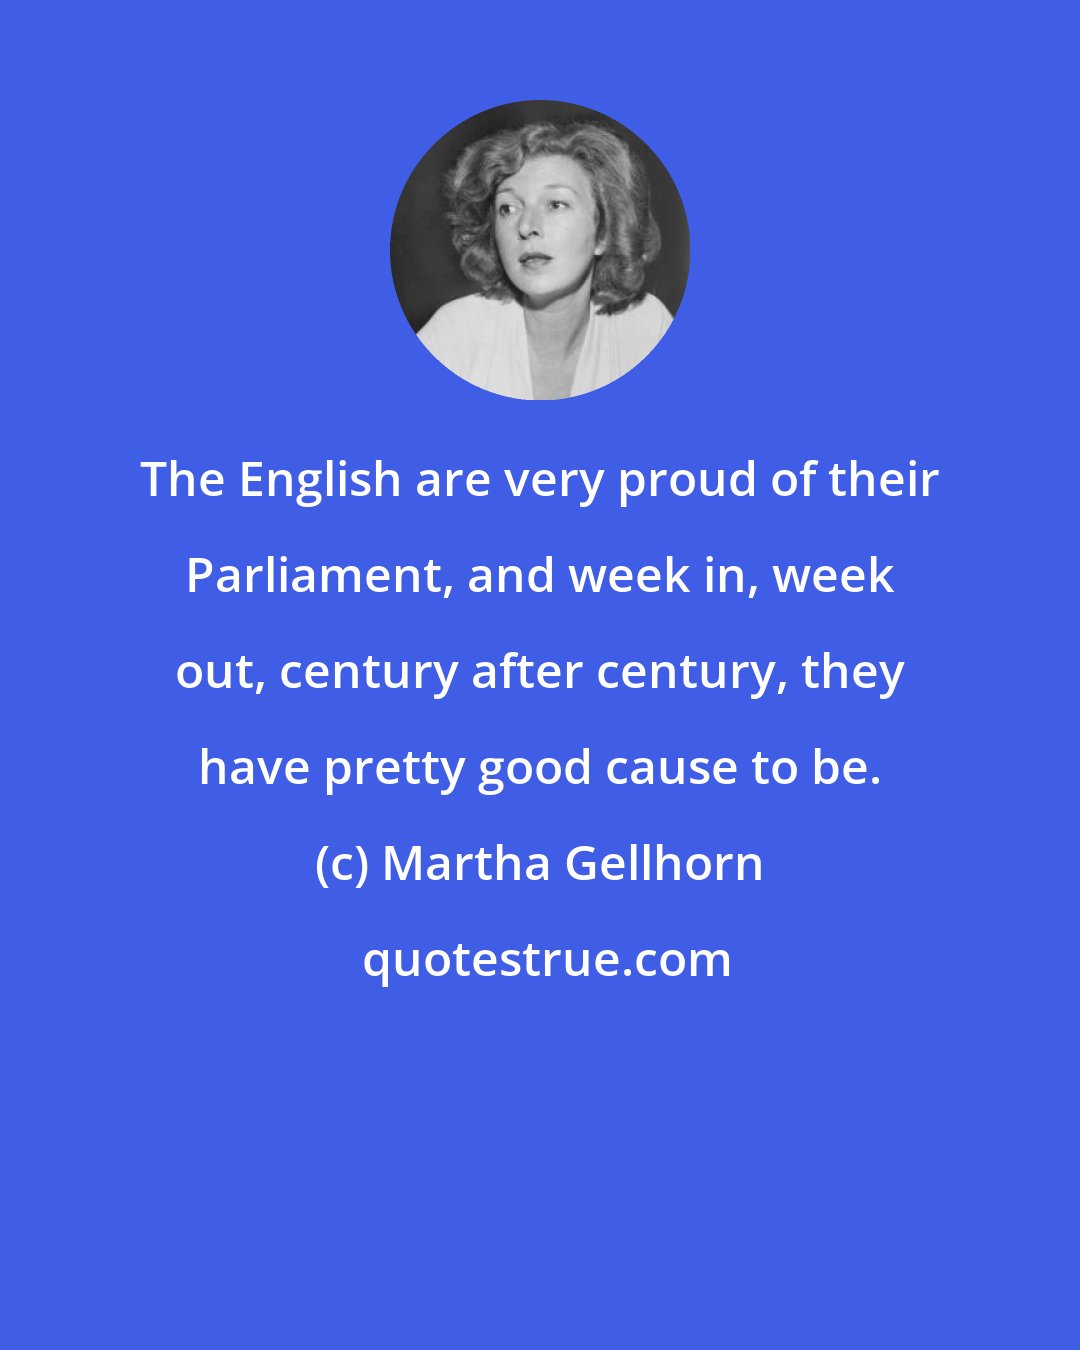 Martha Gellhorn: The English are very proud of their Parliament, and week in, week out, century after century, they have pretty good cause to be.